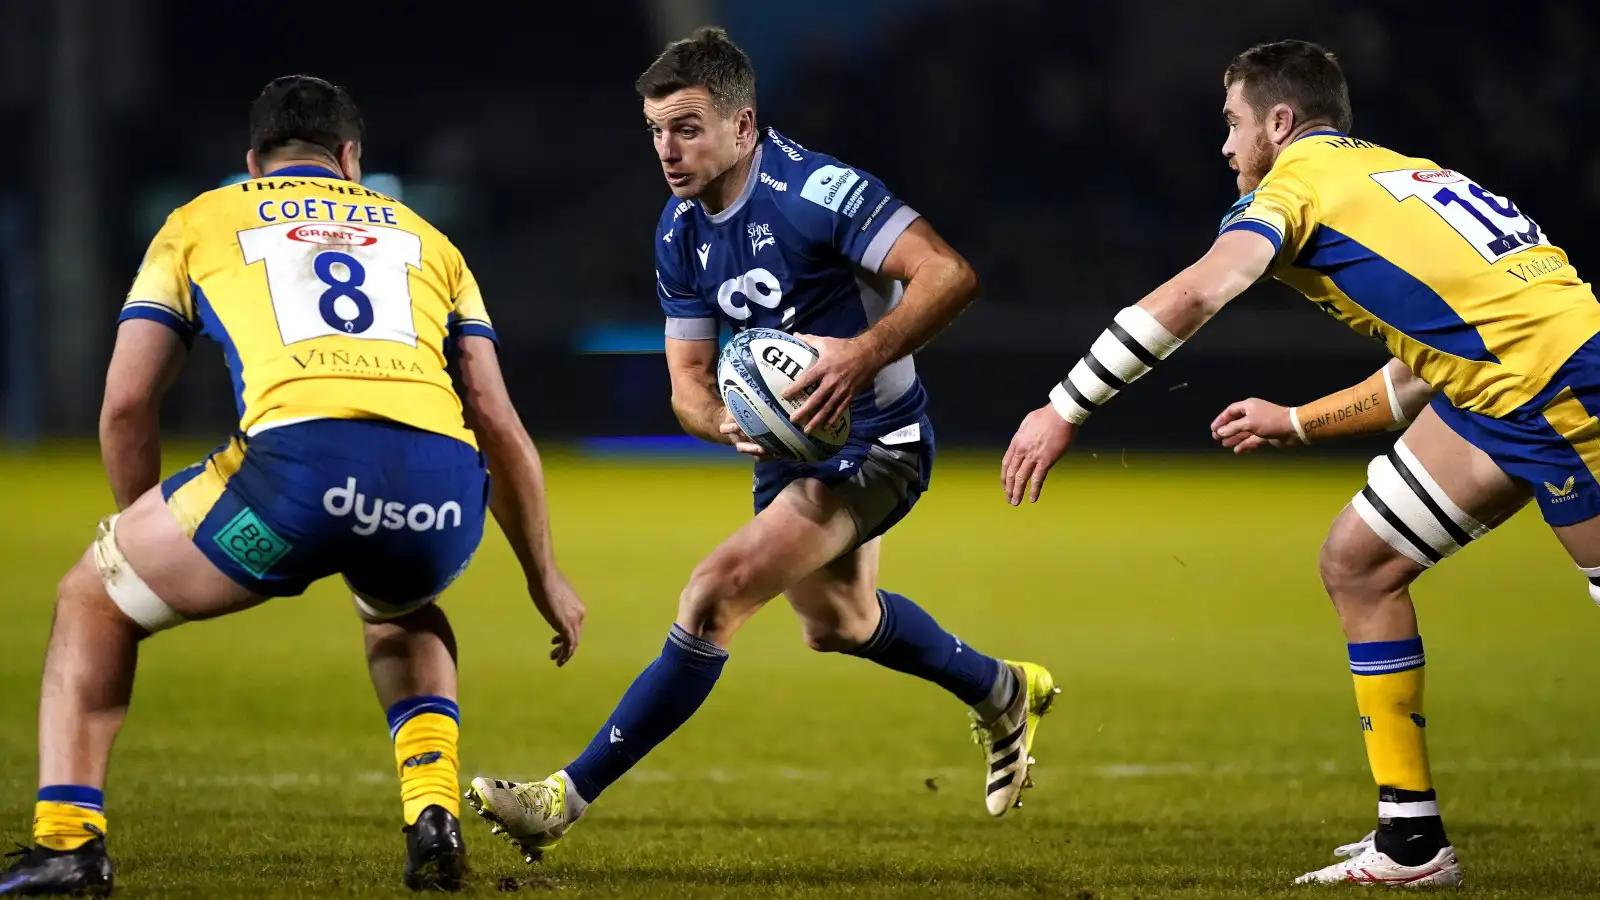 George Ford in action for Sale Sharks against Bath.